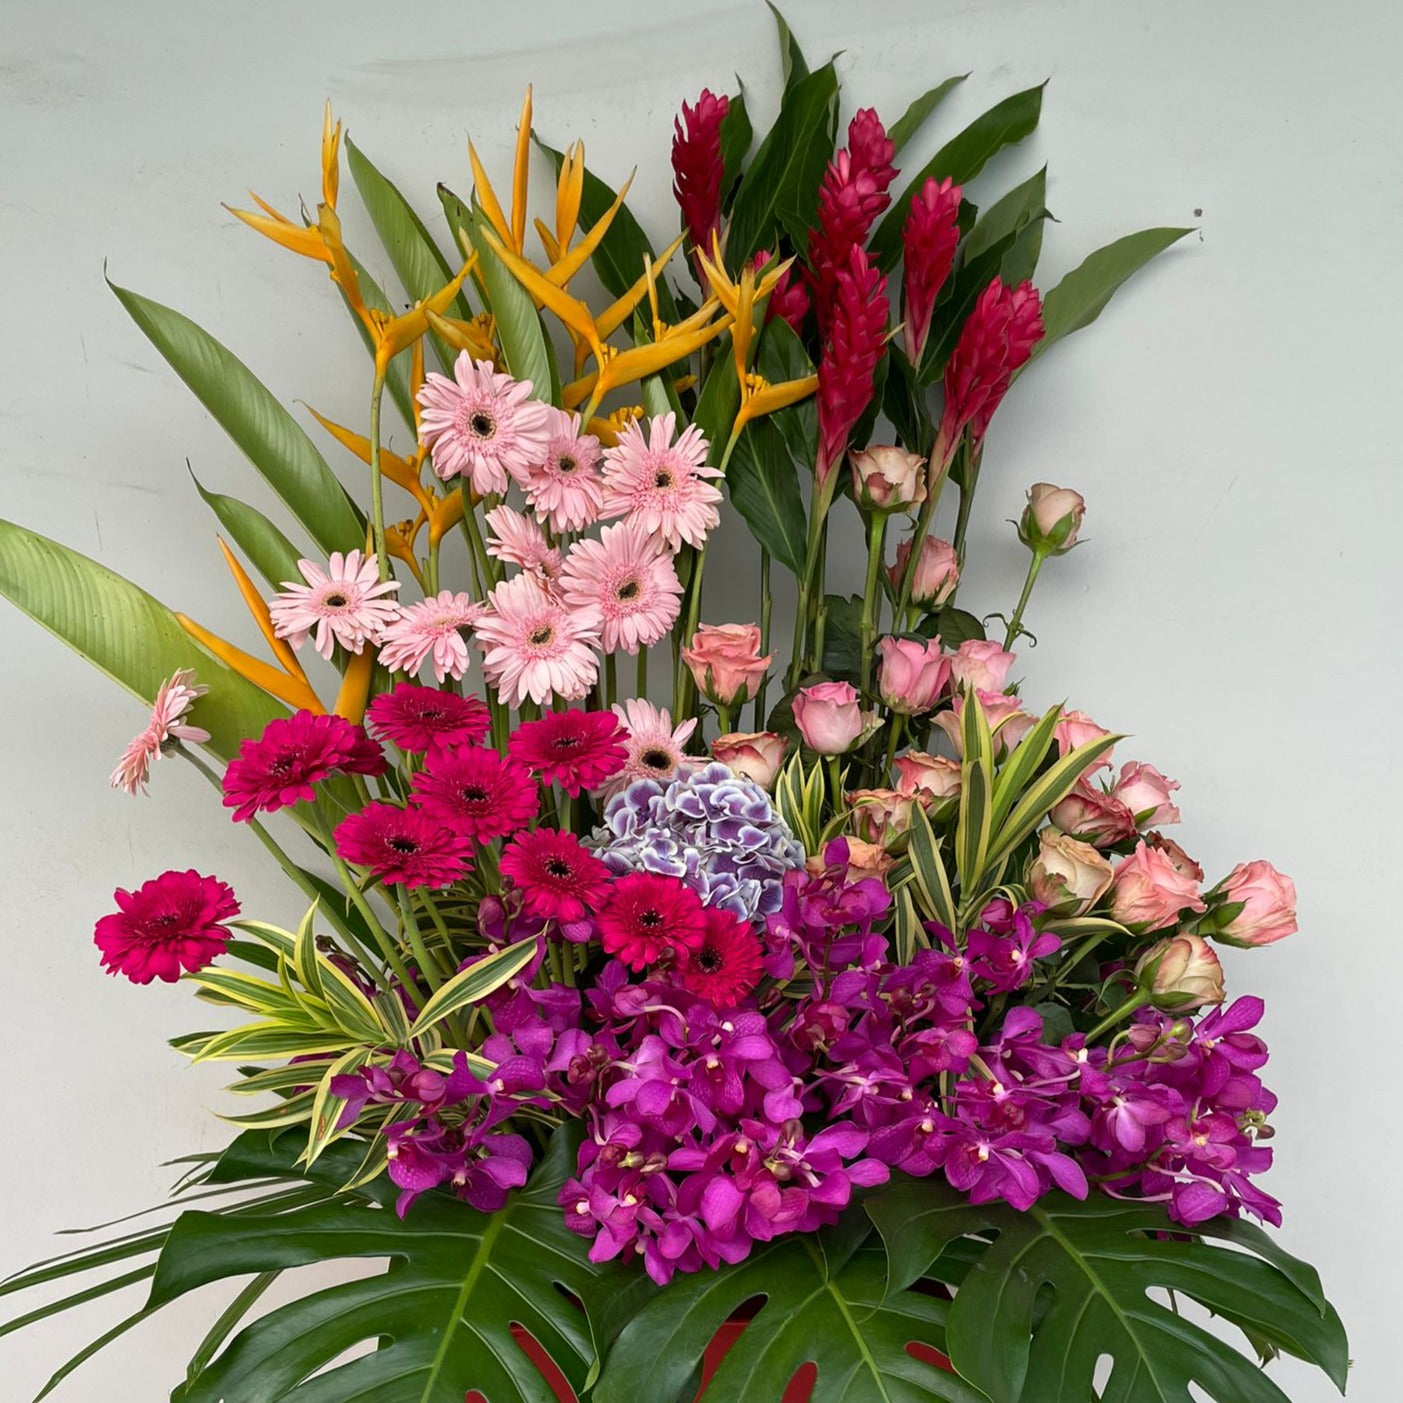 Cheap Fresh Gerbera Daisies, Bird of Paradises, Ginger flower, Roses and Hydrangea Grand Opening Floral Stand Below $300 in Singapore Free Delivery